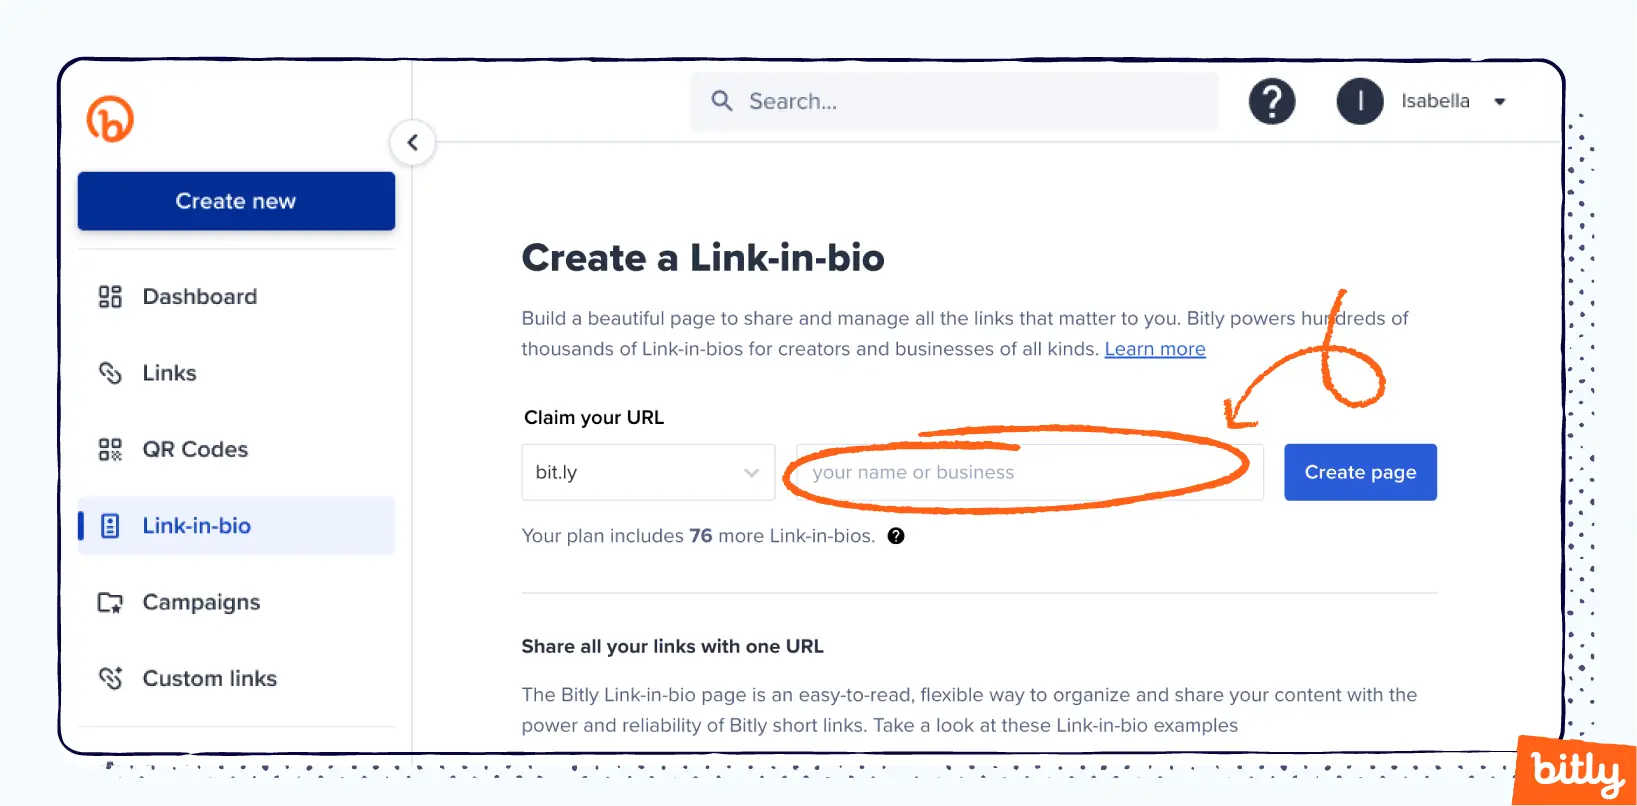 An orange arrow pointing to the box where you can input your name or business when creating a Bitly Link-in-bio.